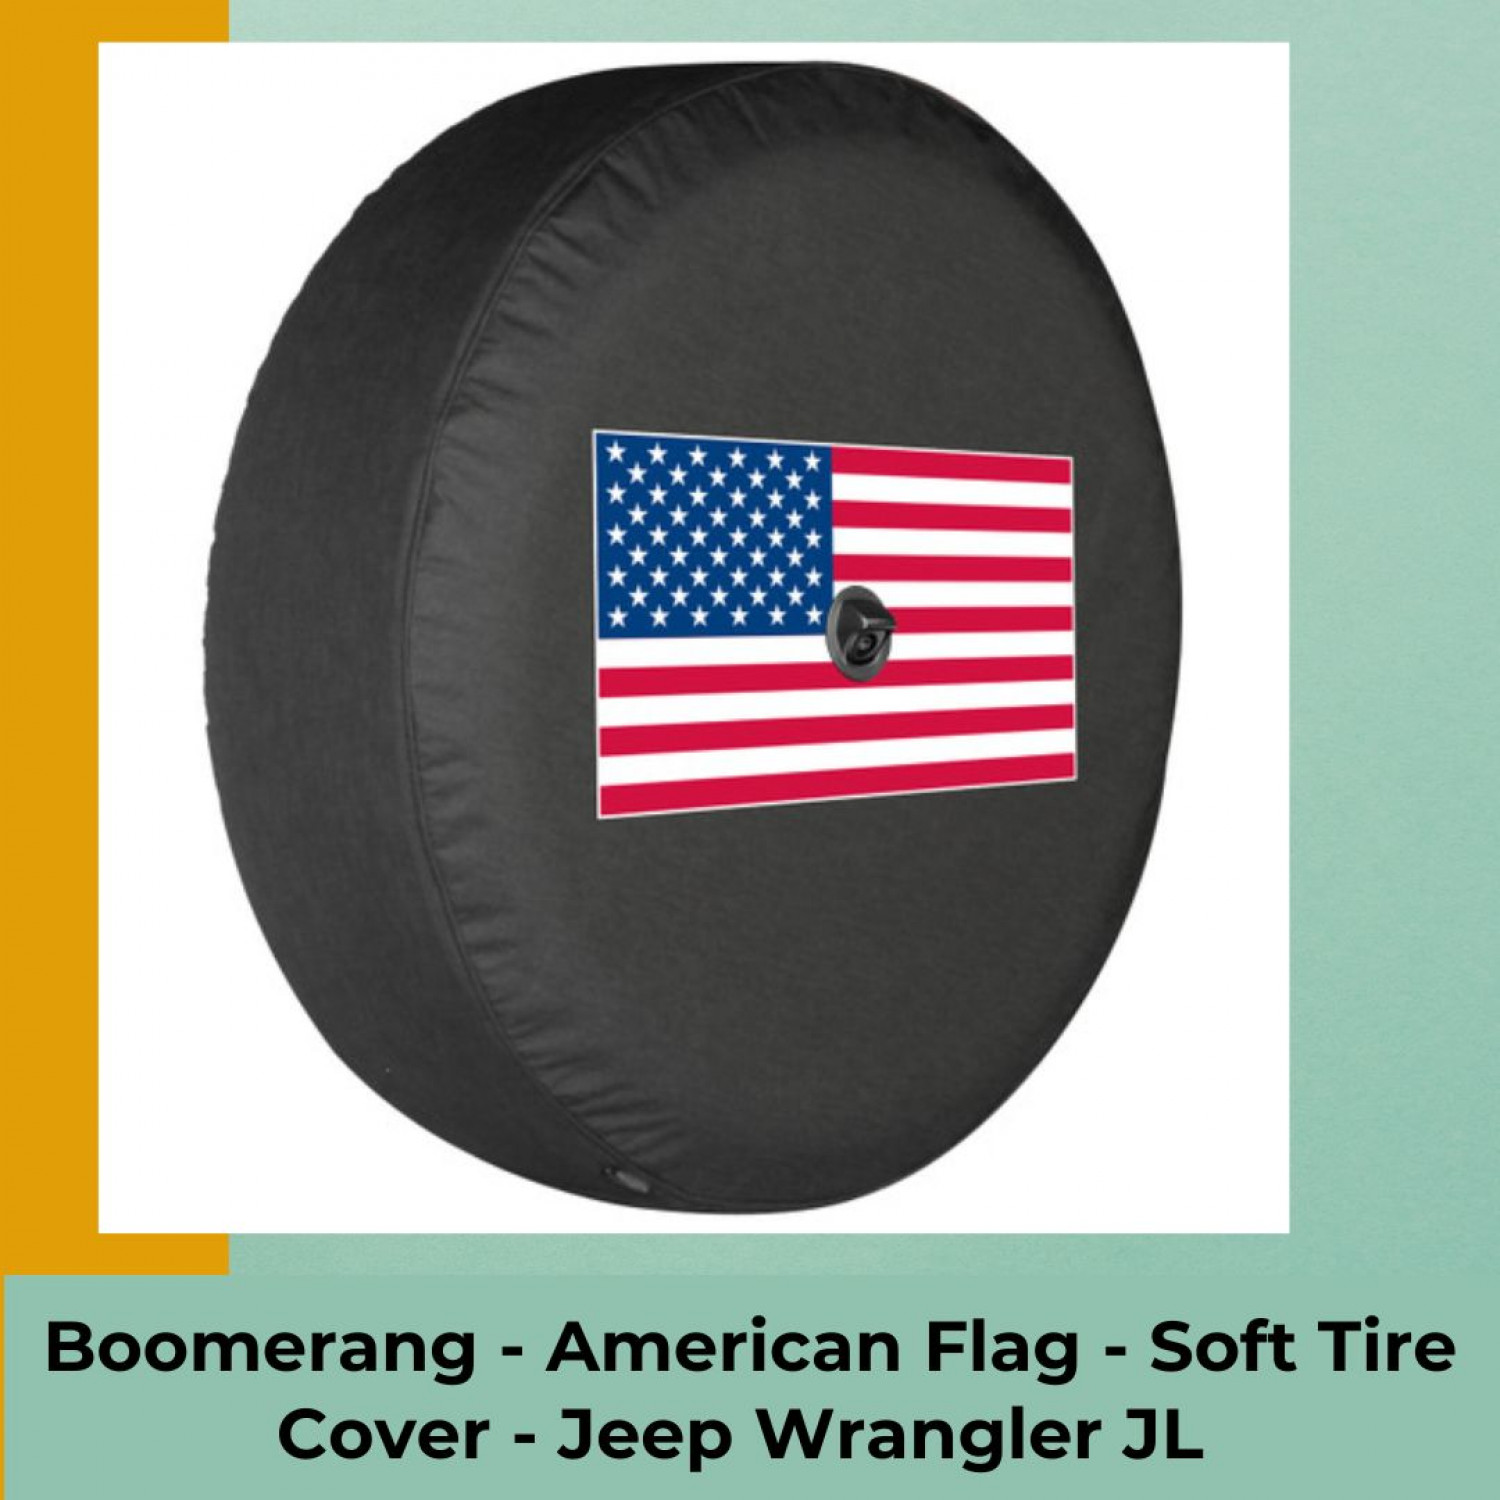 Boomerang - American Flag - Soft Tire Cover - Jeep Wrangler JL  Infographic